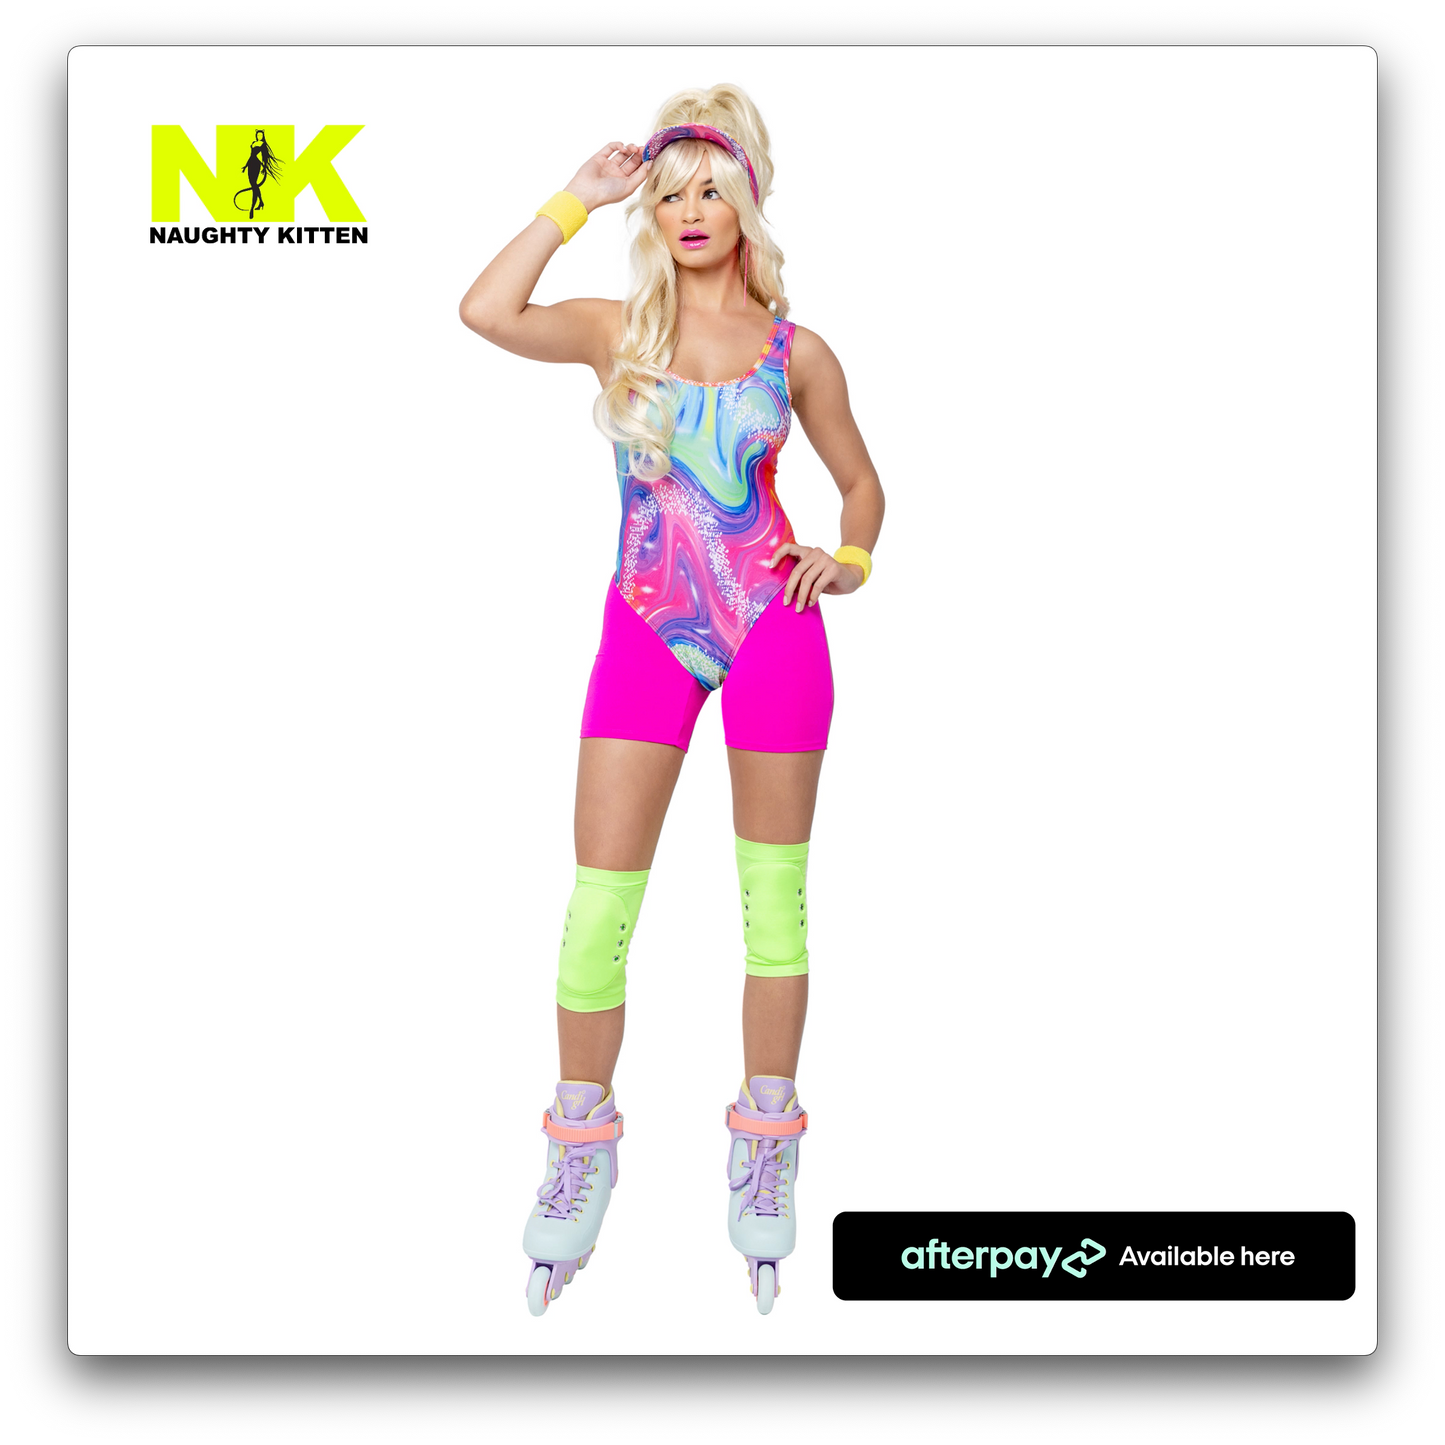 Naughty Kitten Clothing Retro Rollerblade Doll Costume front View Halloween Costume 